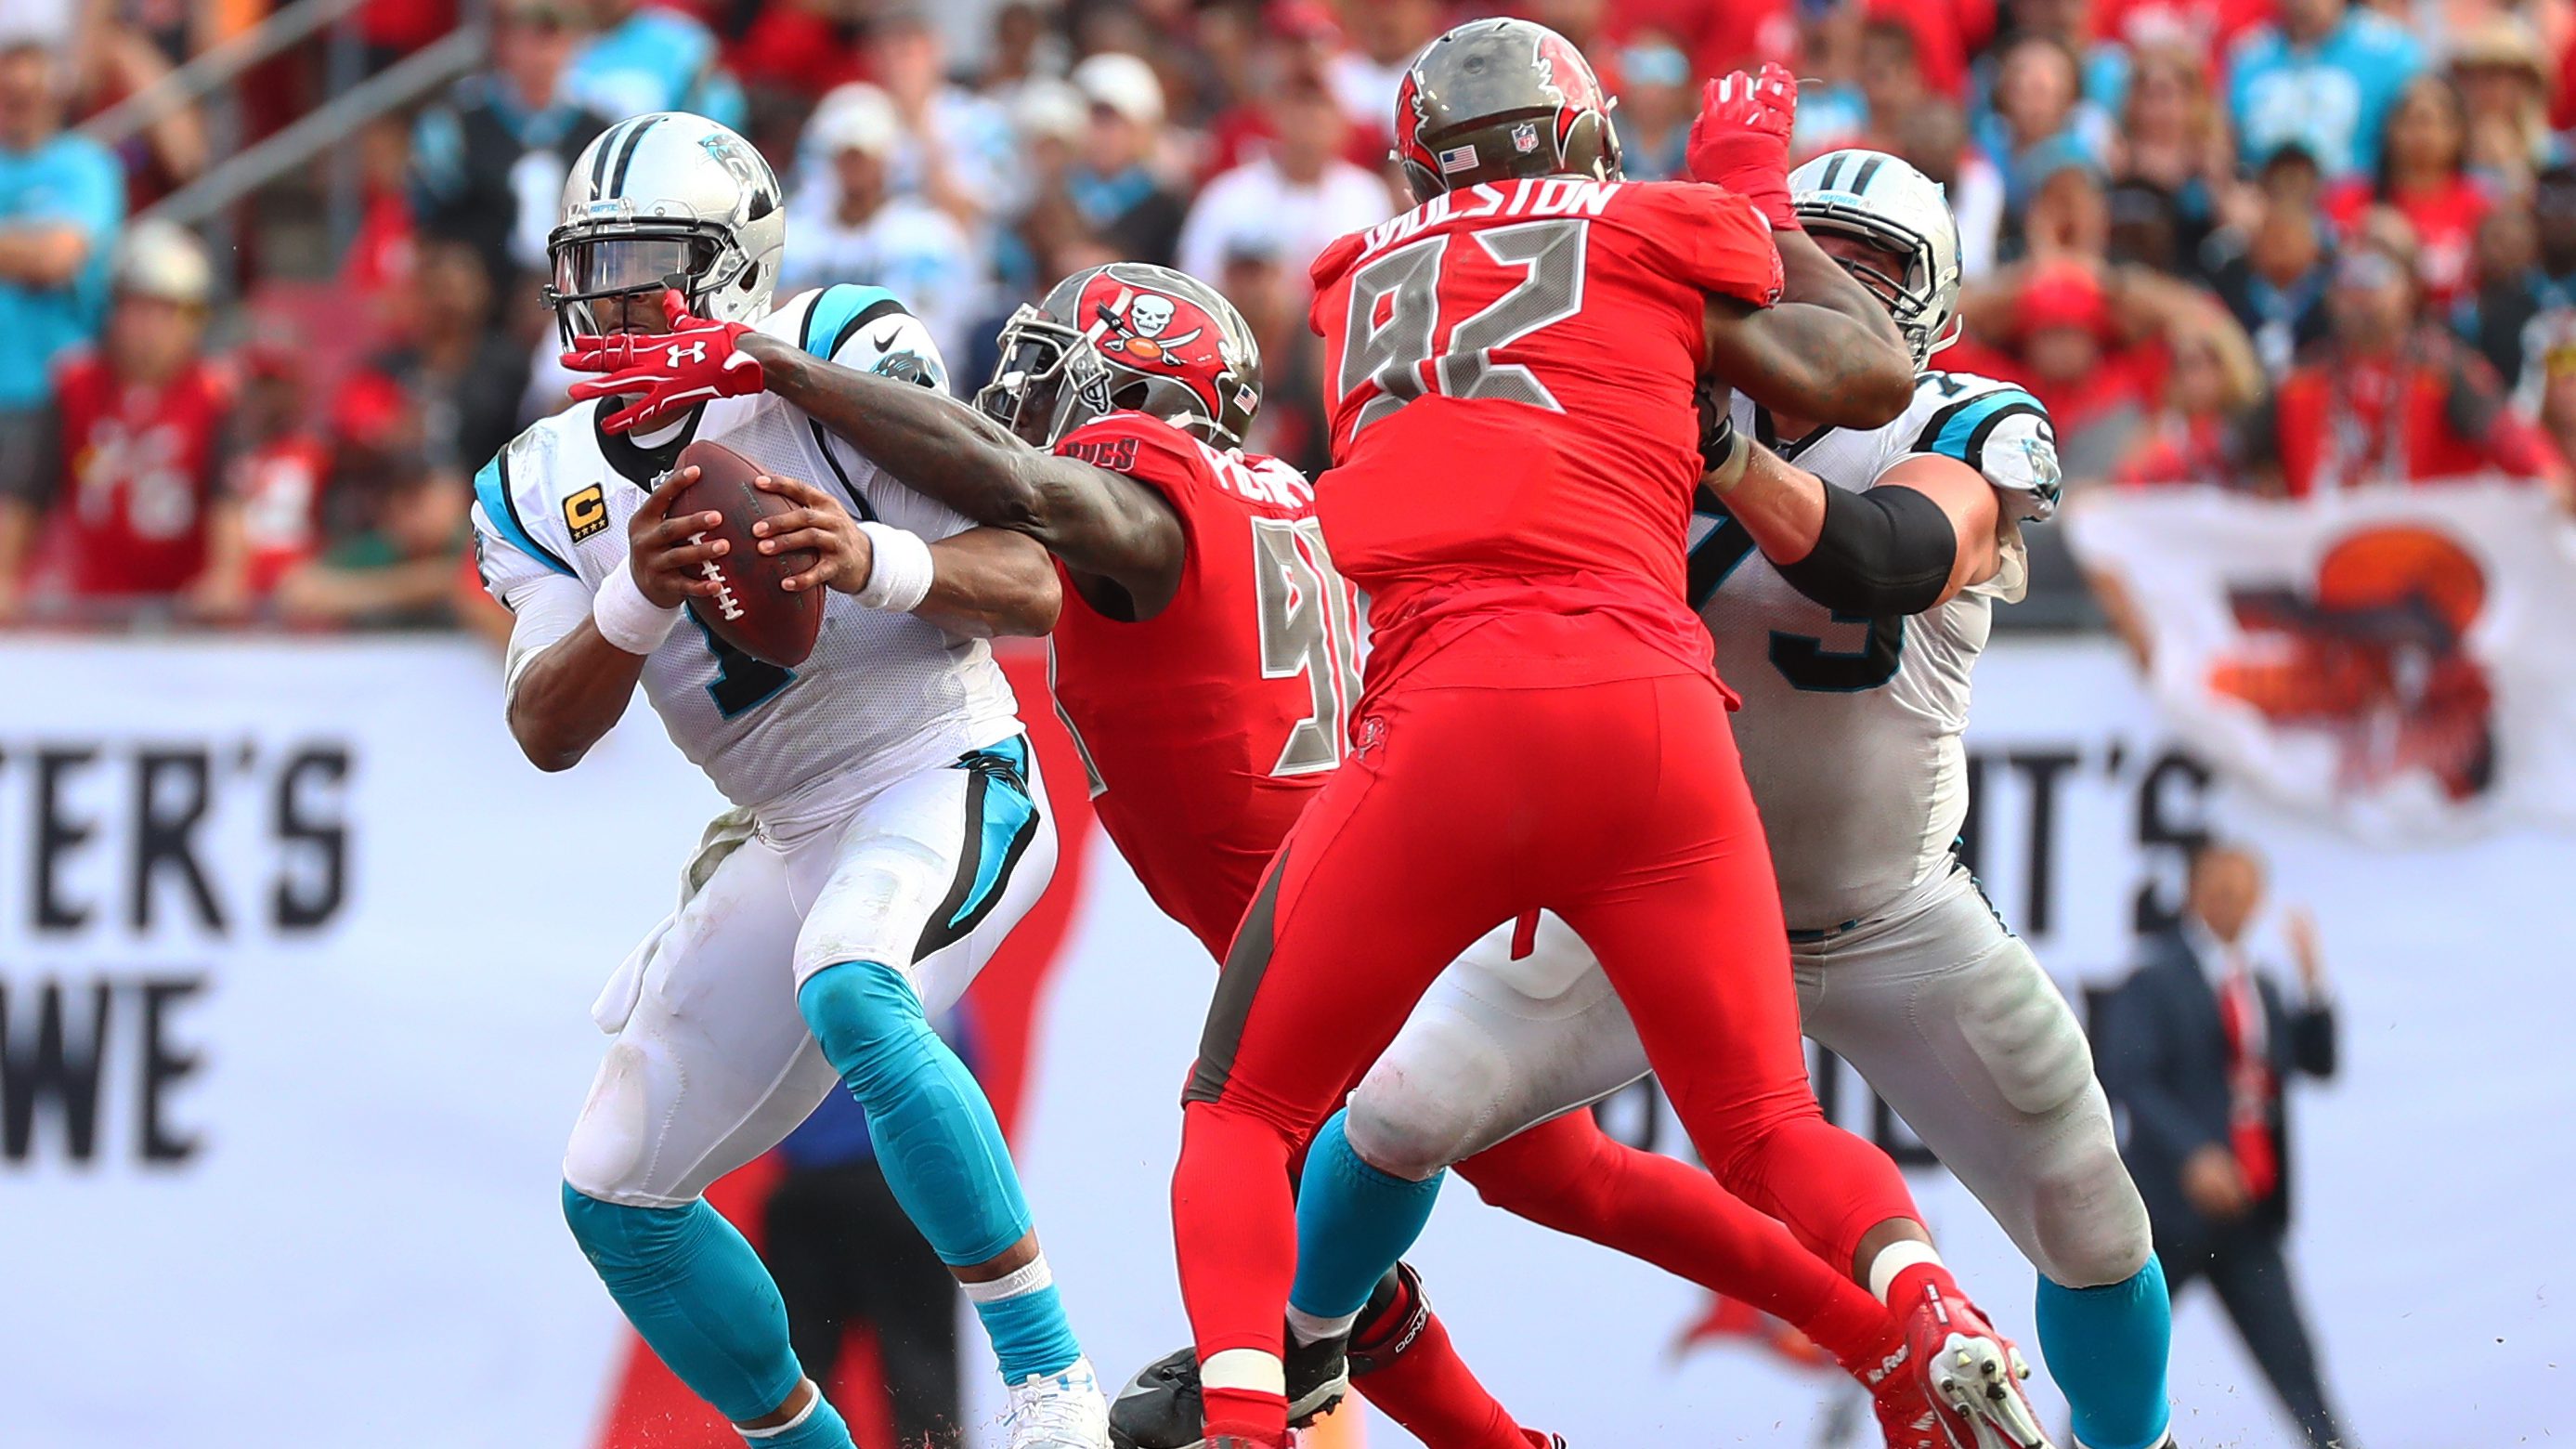 Bucs vs Panthers Live Stream How to Watch Without Cable